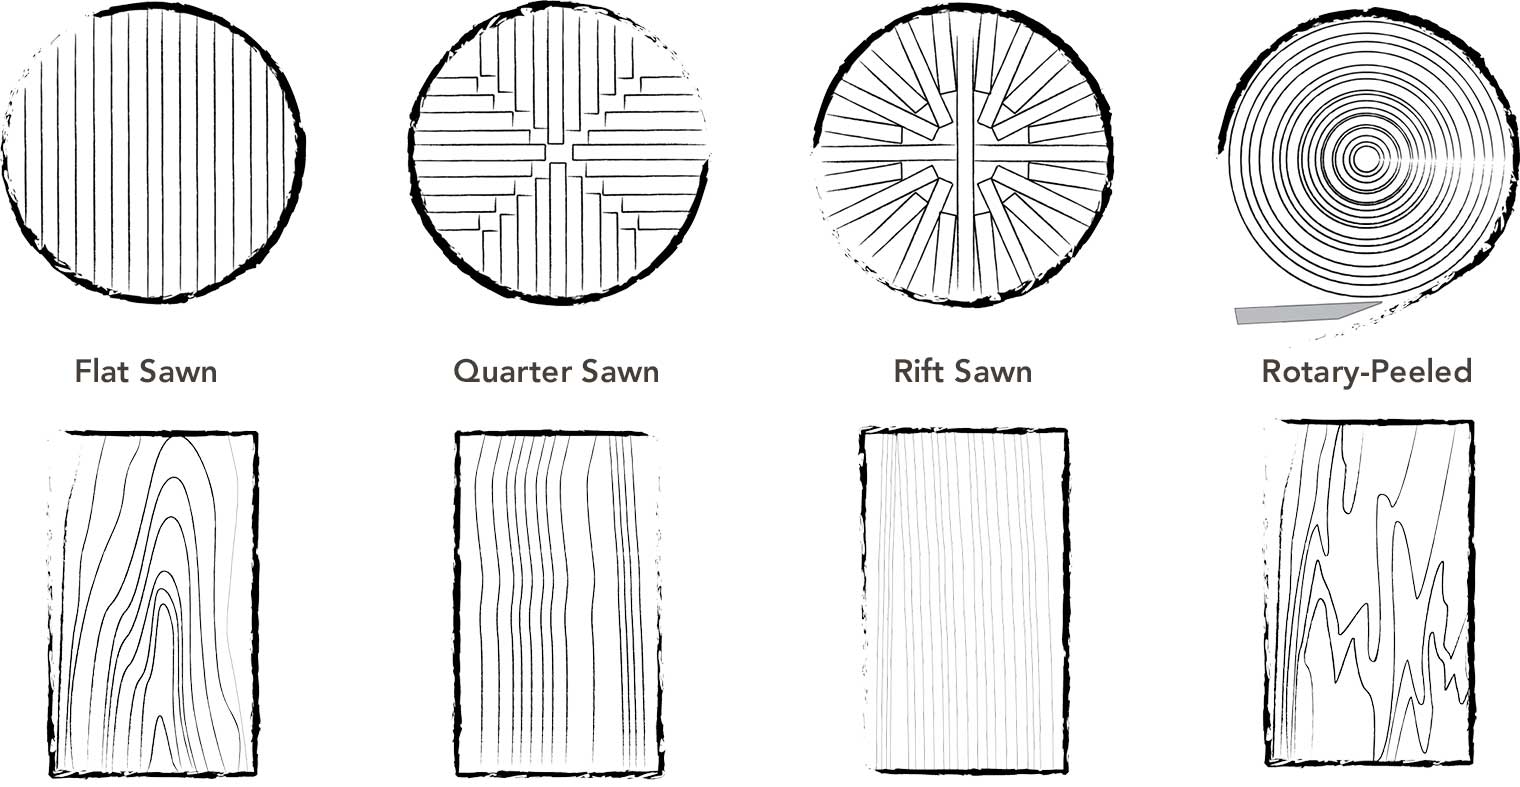 Diagram showing the four most common wood cut types and lumber: flat sawn, quarter sawn, rift sawn and rotary peeled